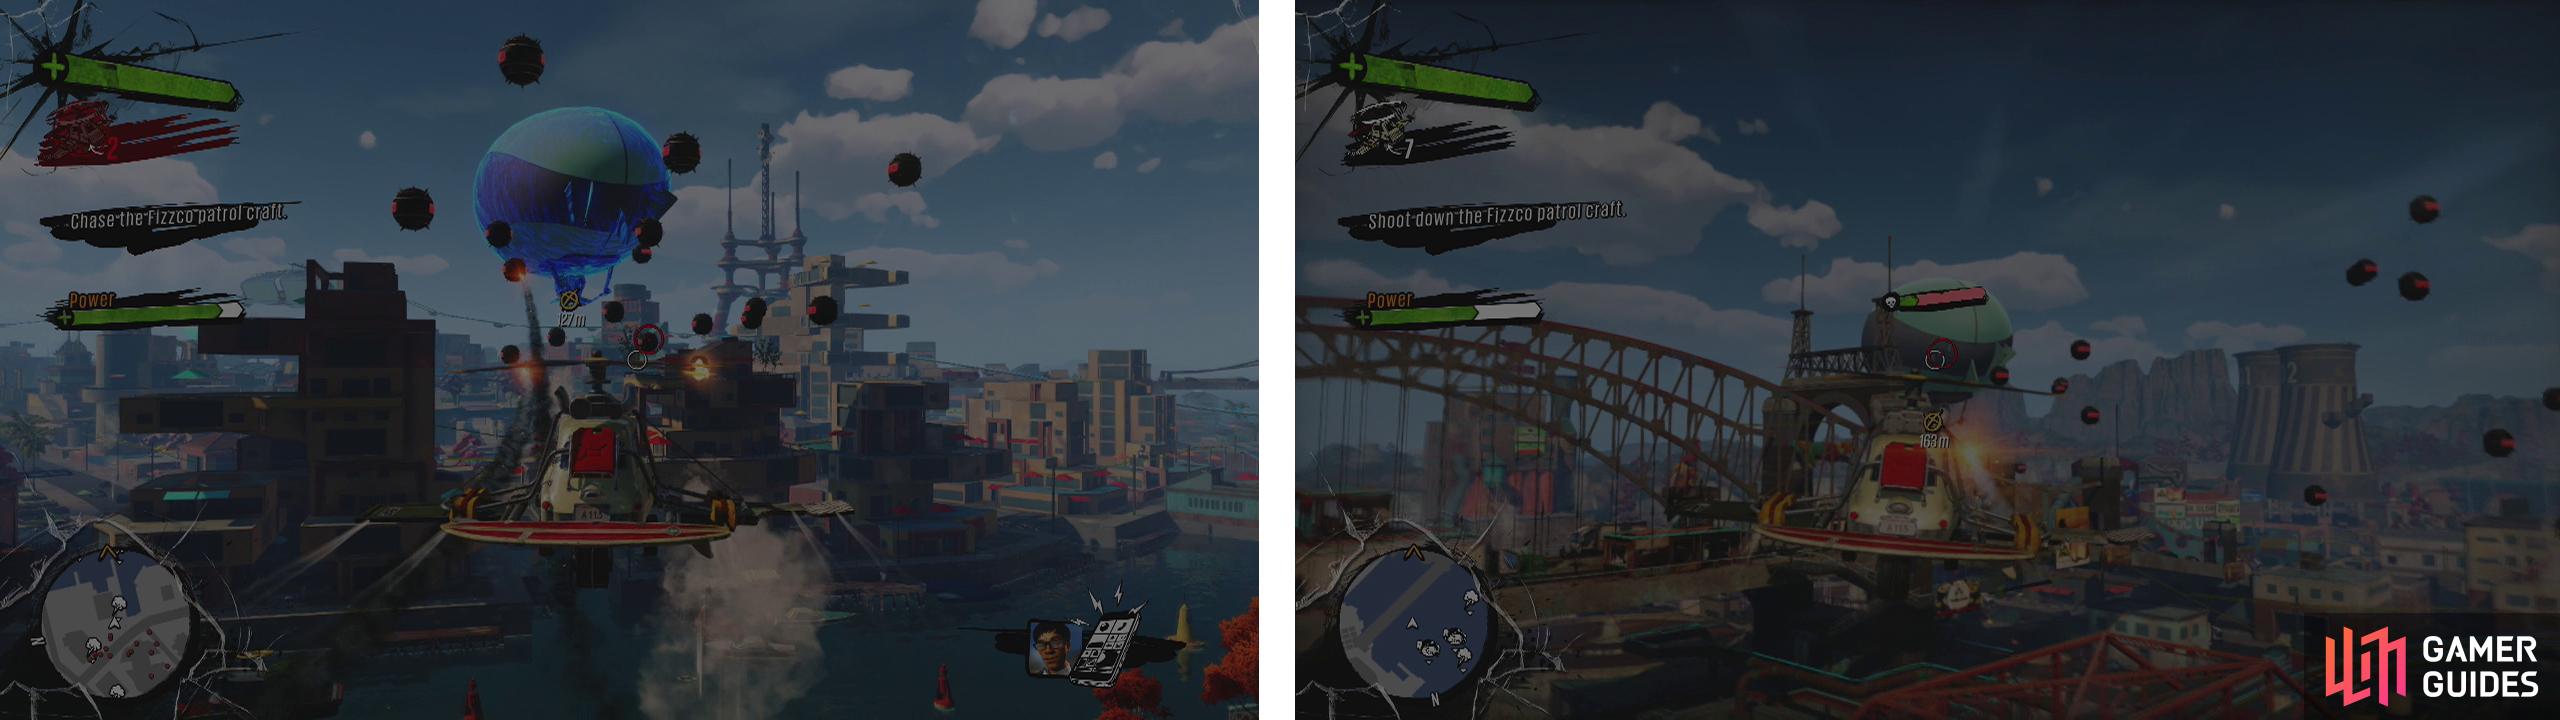 Chase the blimp and destroy or dodge the mines it releases (left). When the blimp’s shield goes down, destroy it (right).